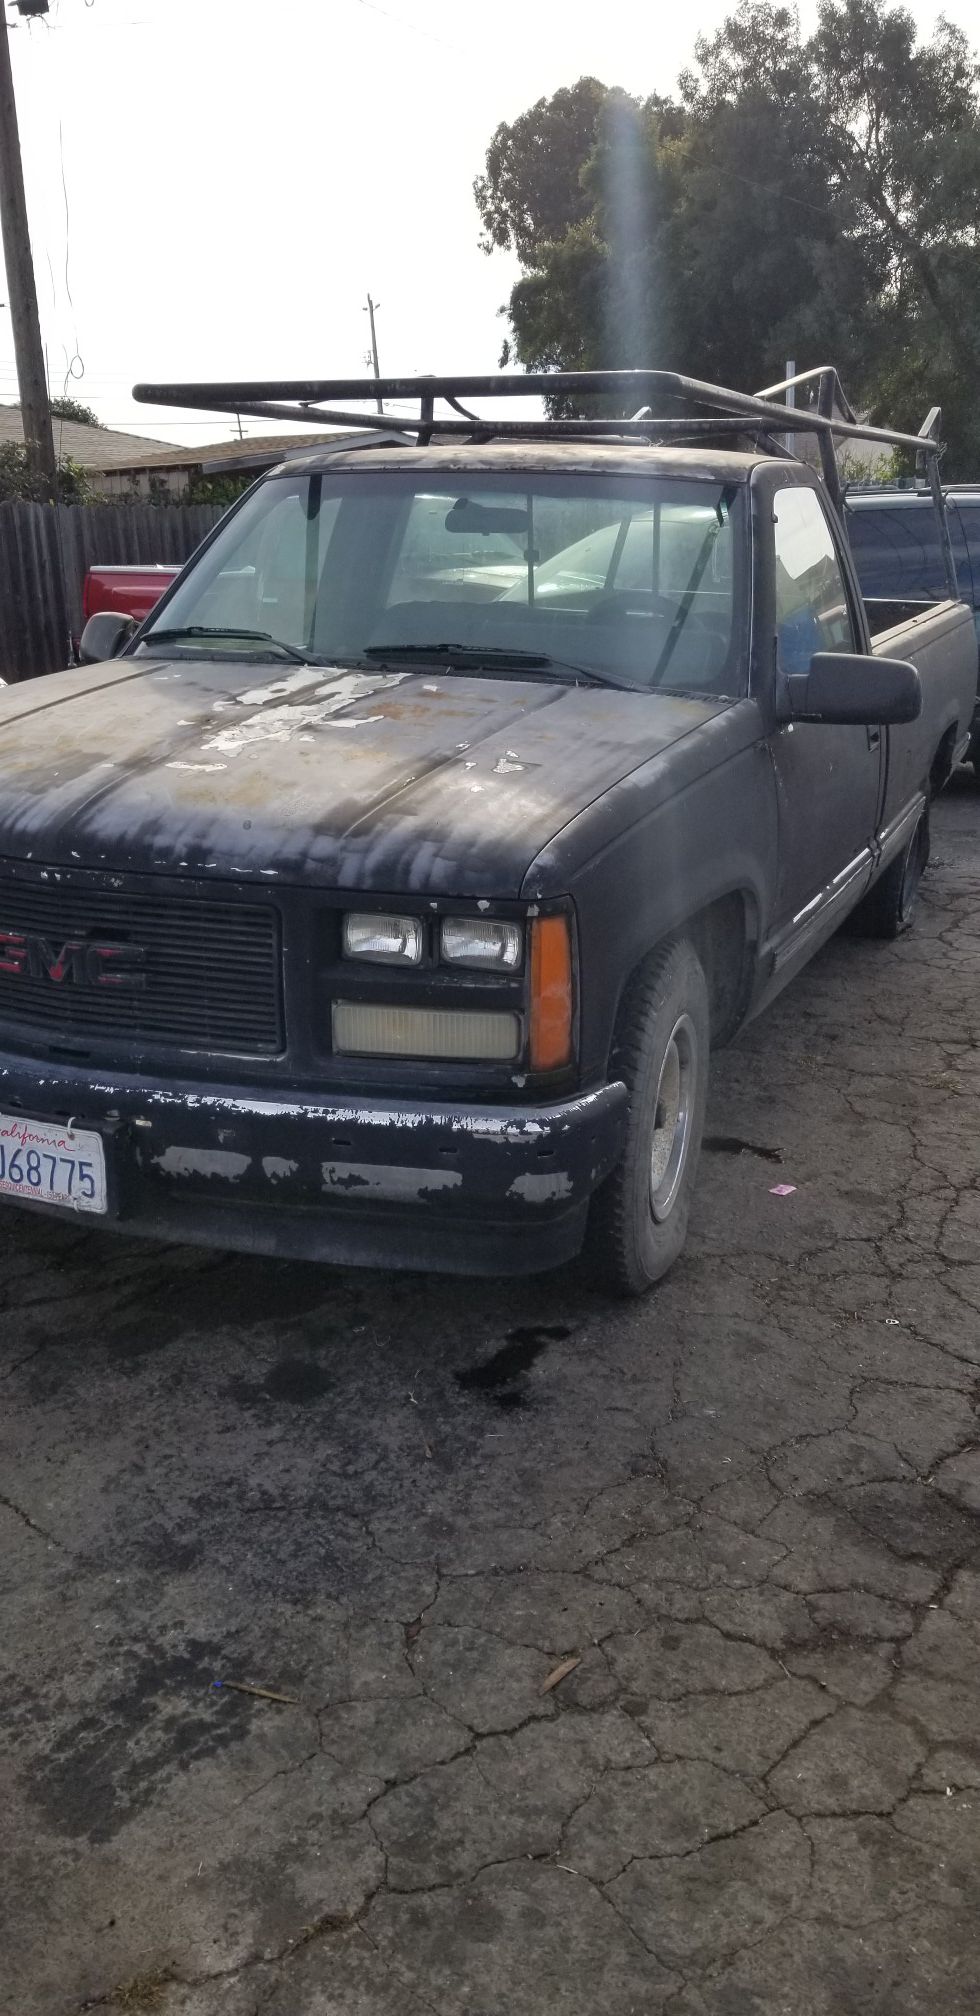 1988 gmc sierra parting out